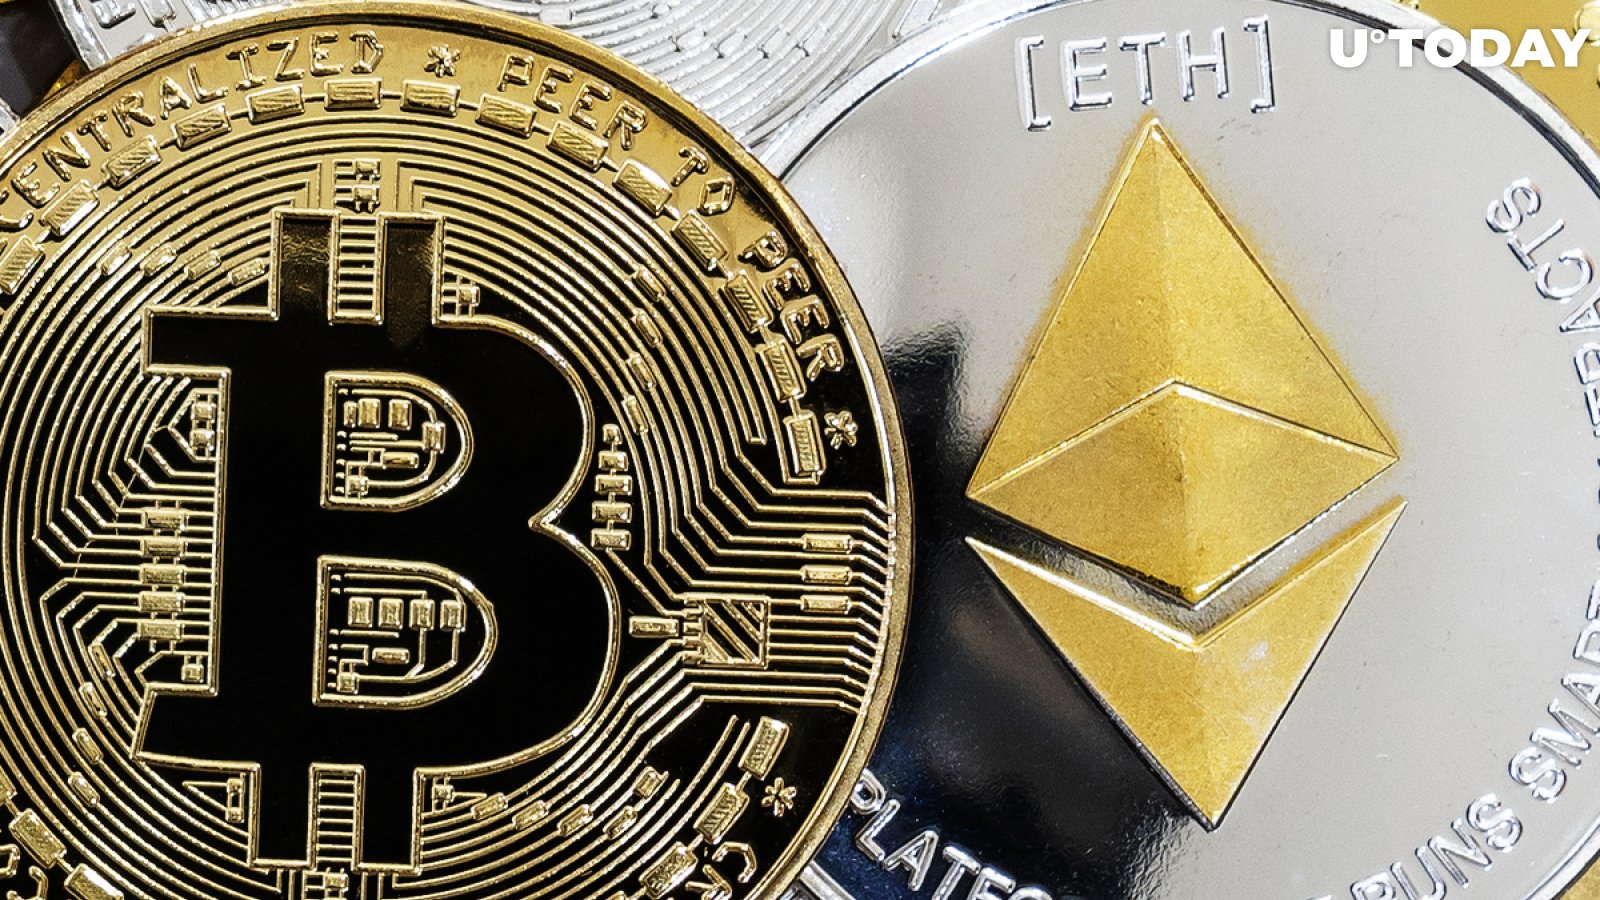 Ethereum Holding Bitcoin from Hitting $100,000: Bloomberg’s Mike McGlone